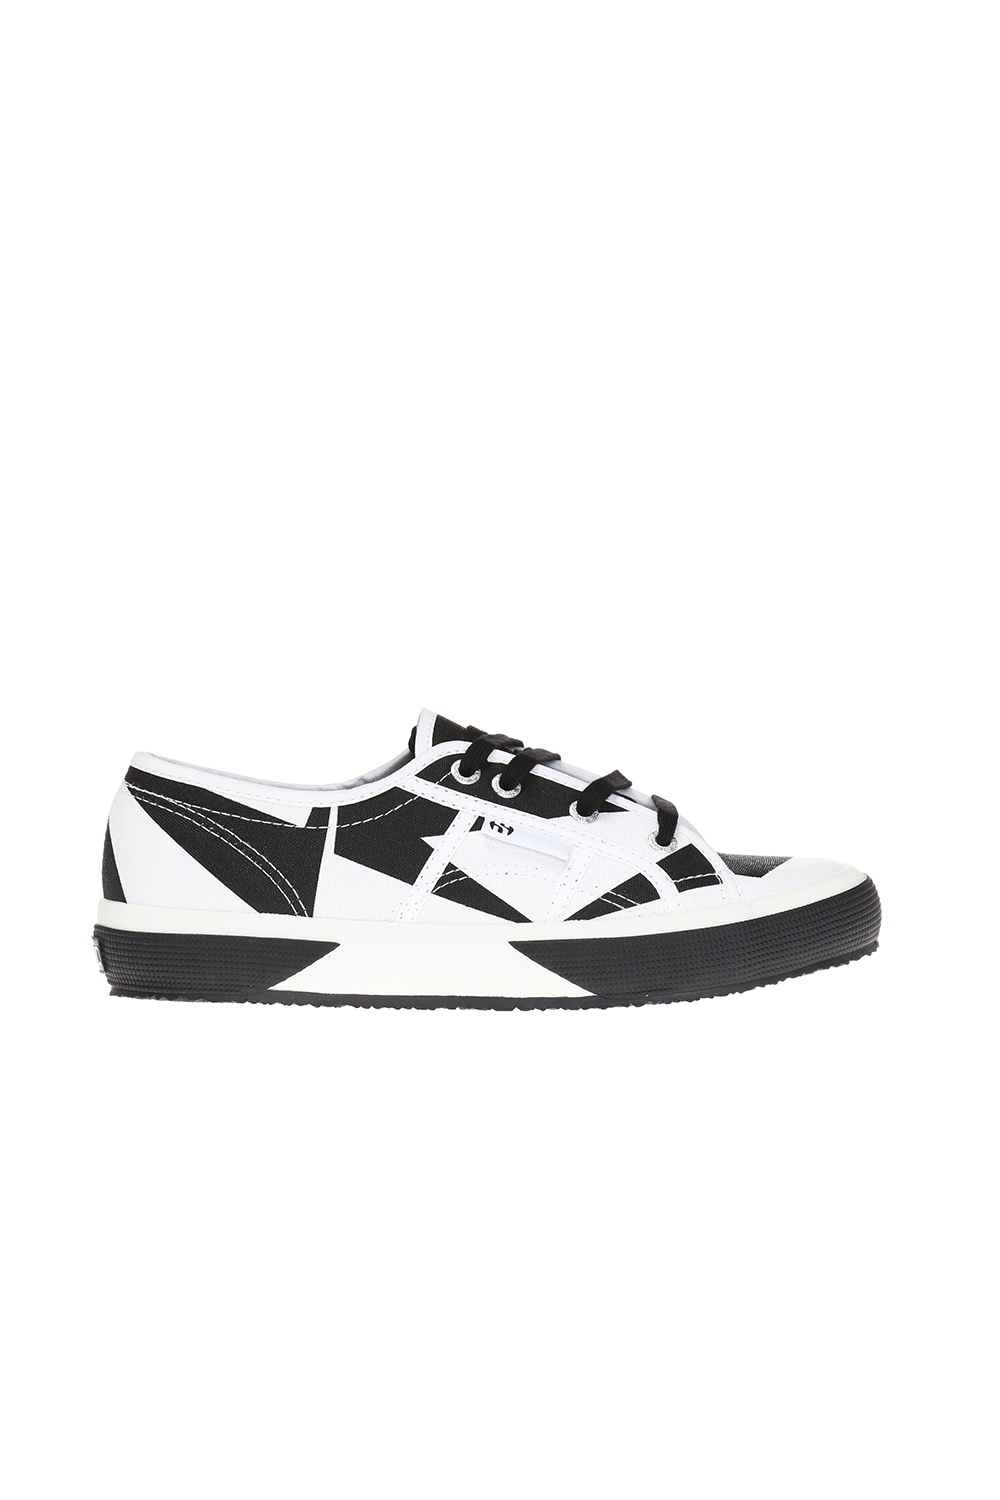 Superga PATTERNED SNEAKERS